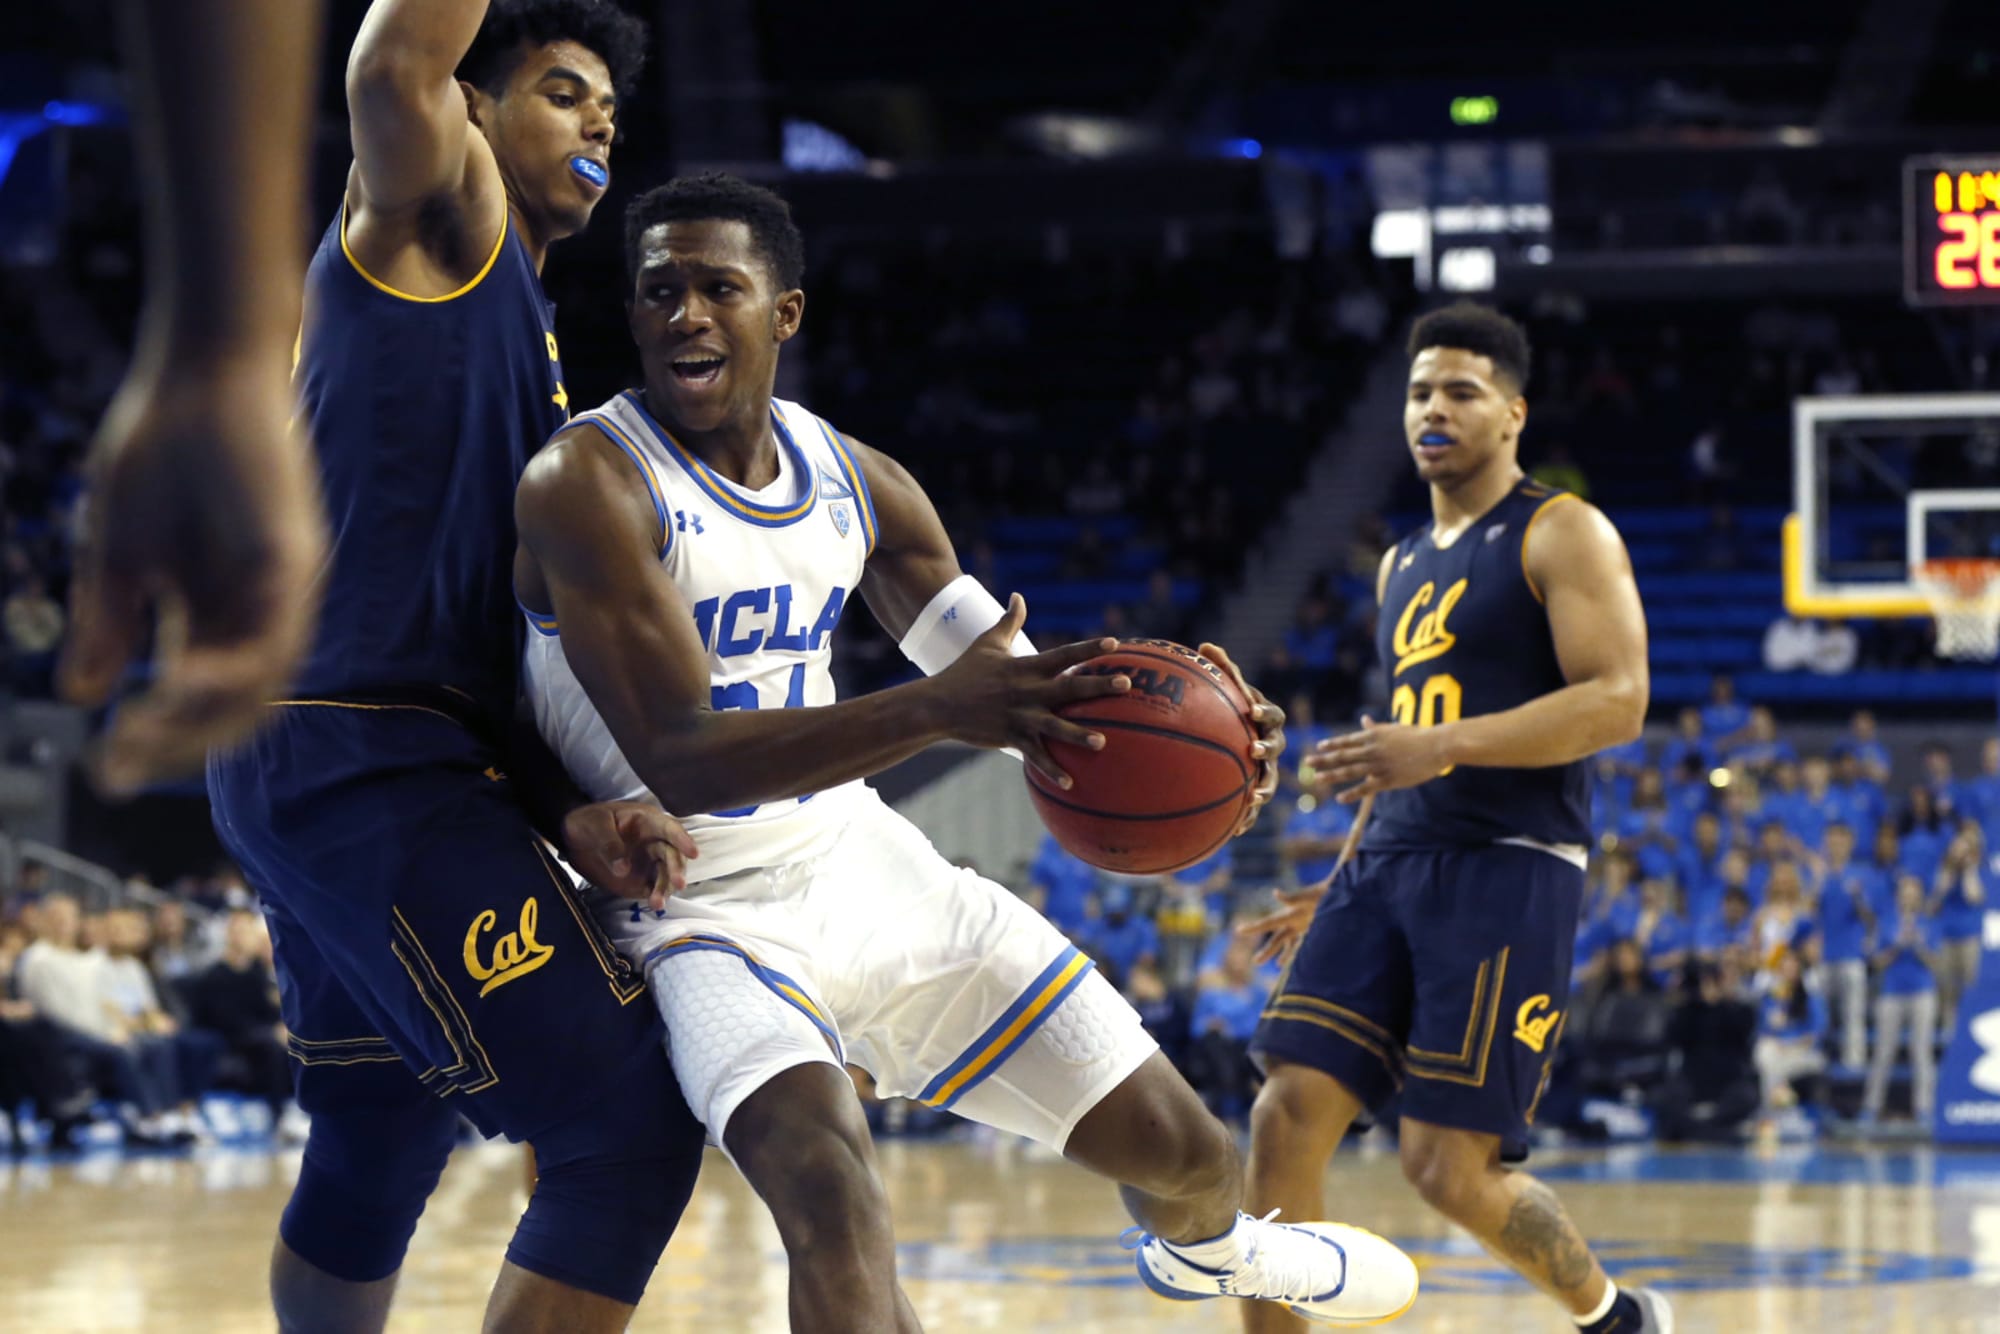 Ucla Basketball Scholarship Distribution After The Exit Of 3 Bruins